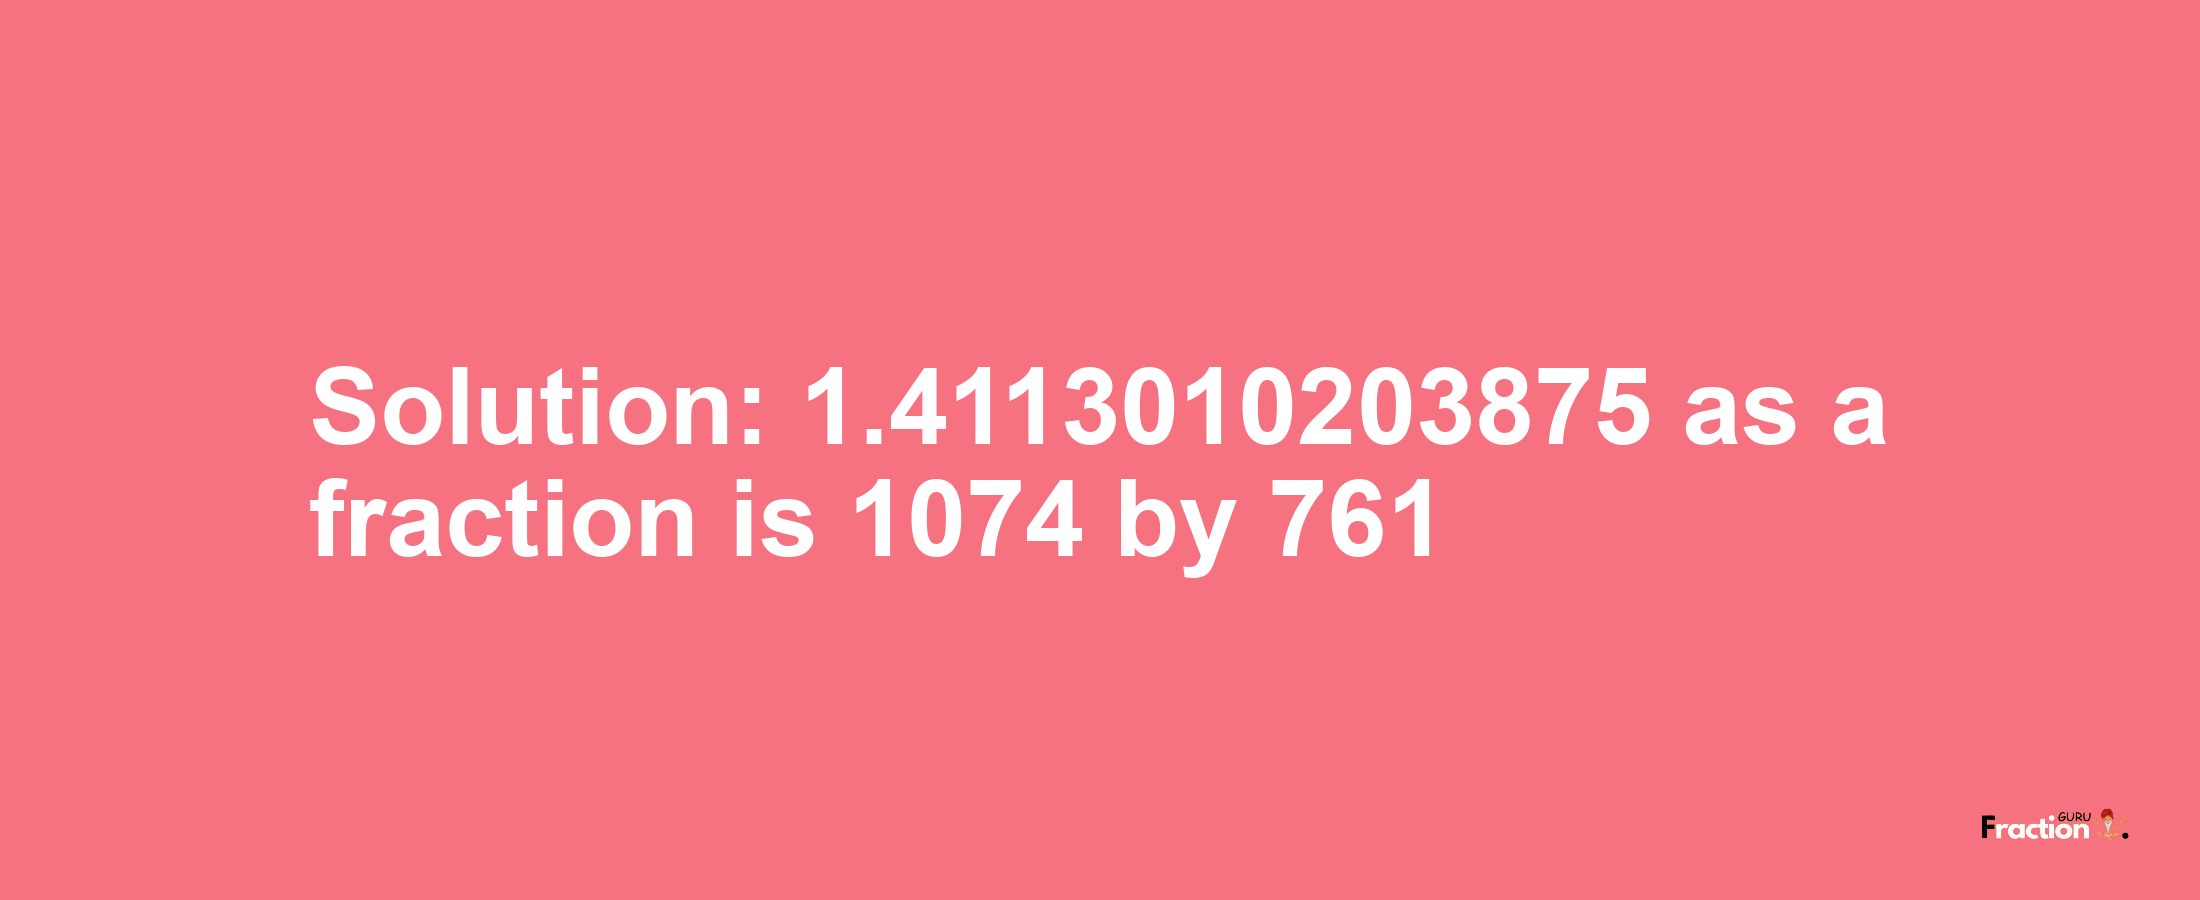 Solution:1.4113010203875 as a fraction is 1074/761